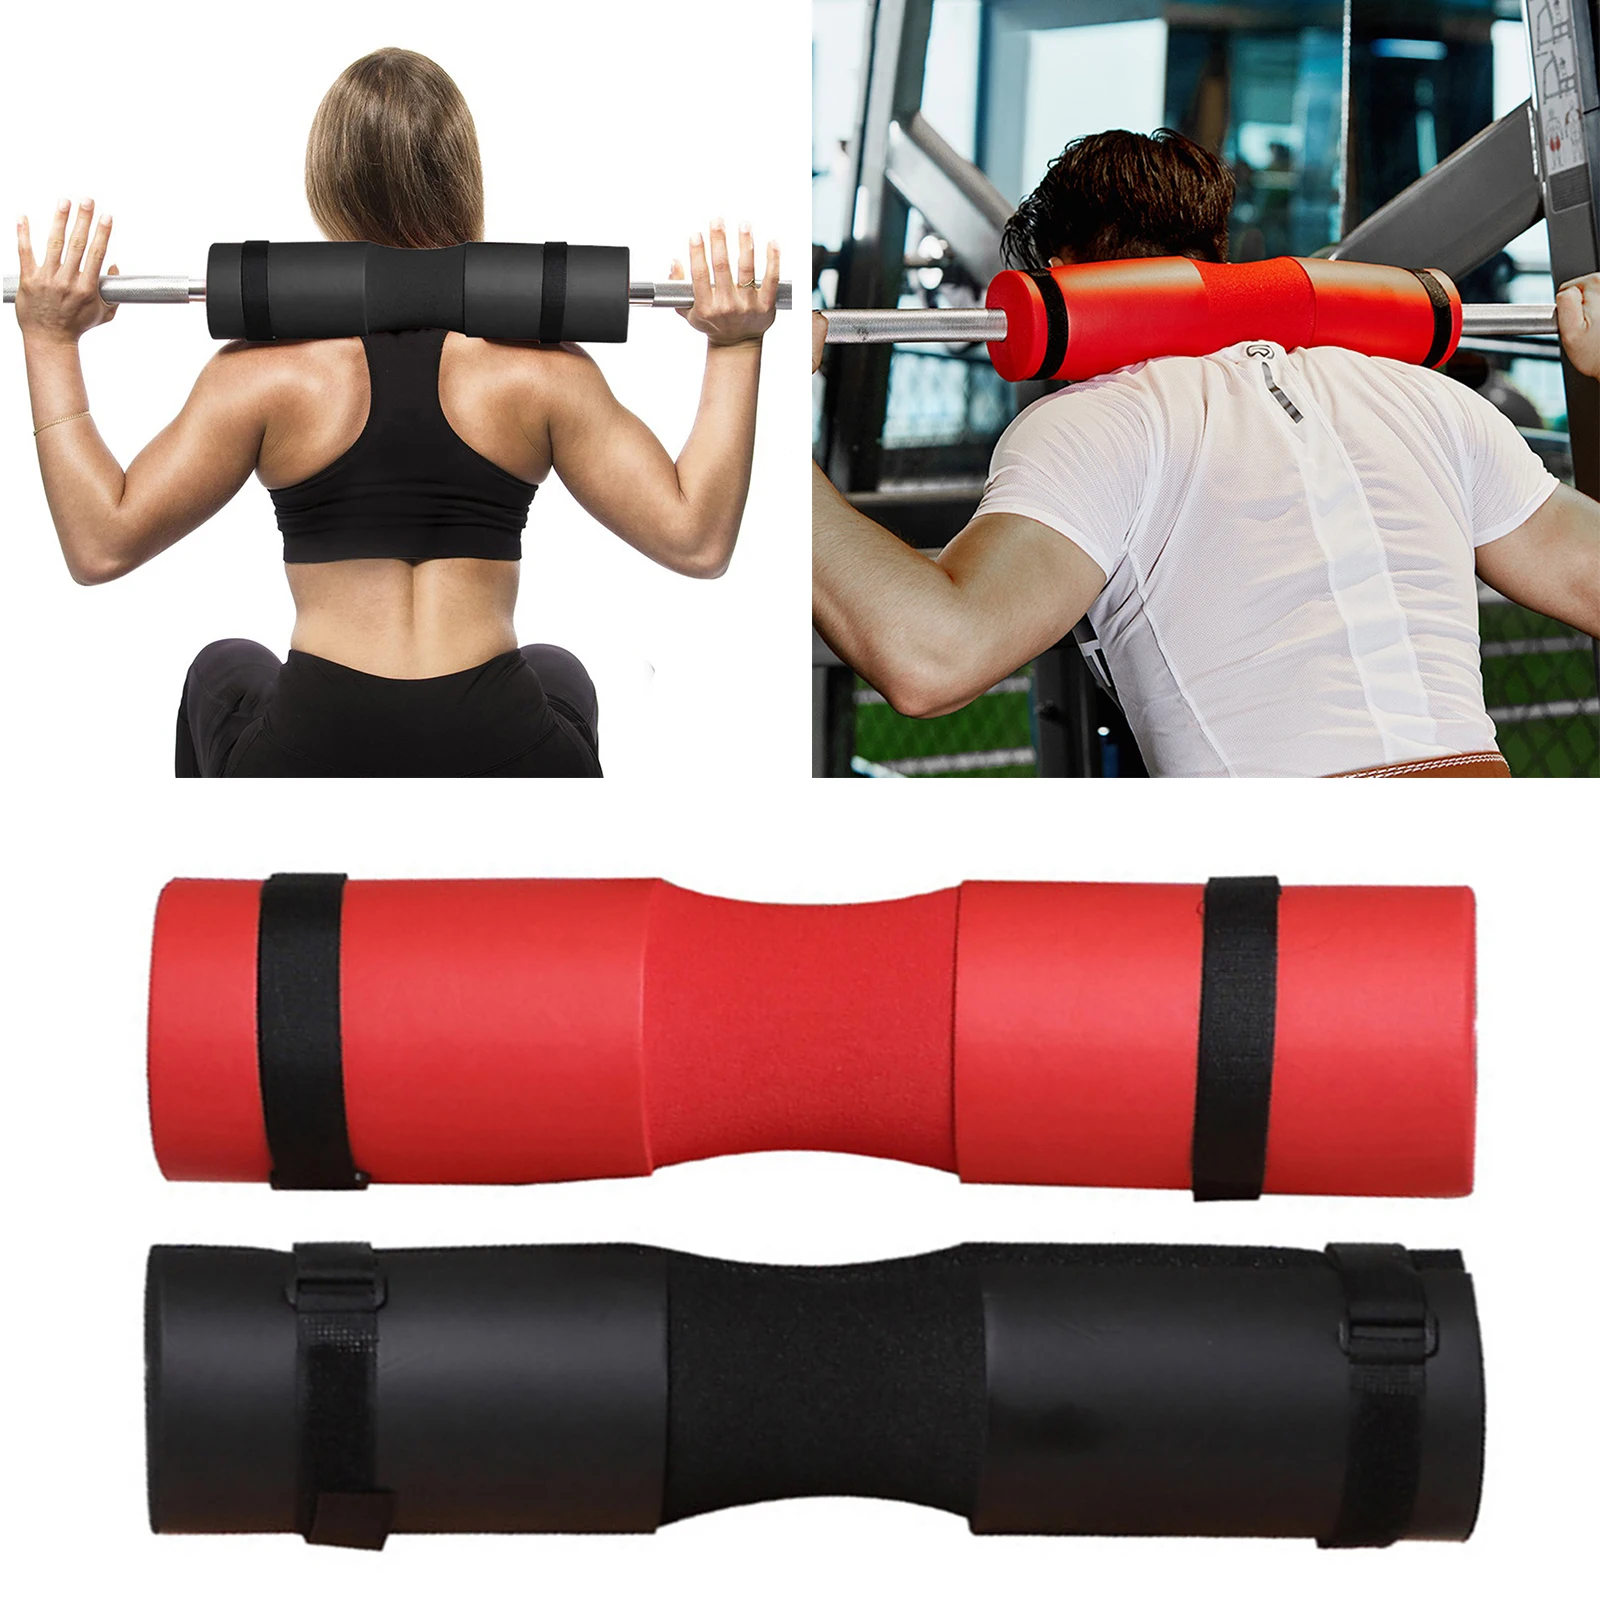 Weight Lifting Barbell Pad Squat Bar Strength Training Neck Shoulder Protection